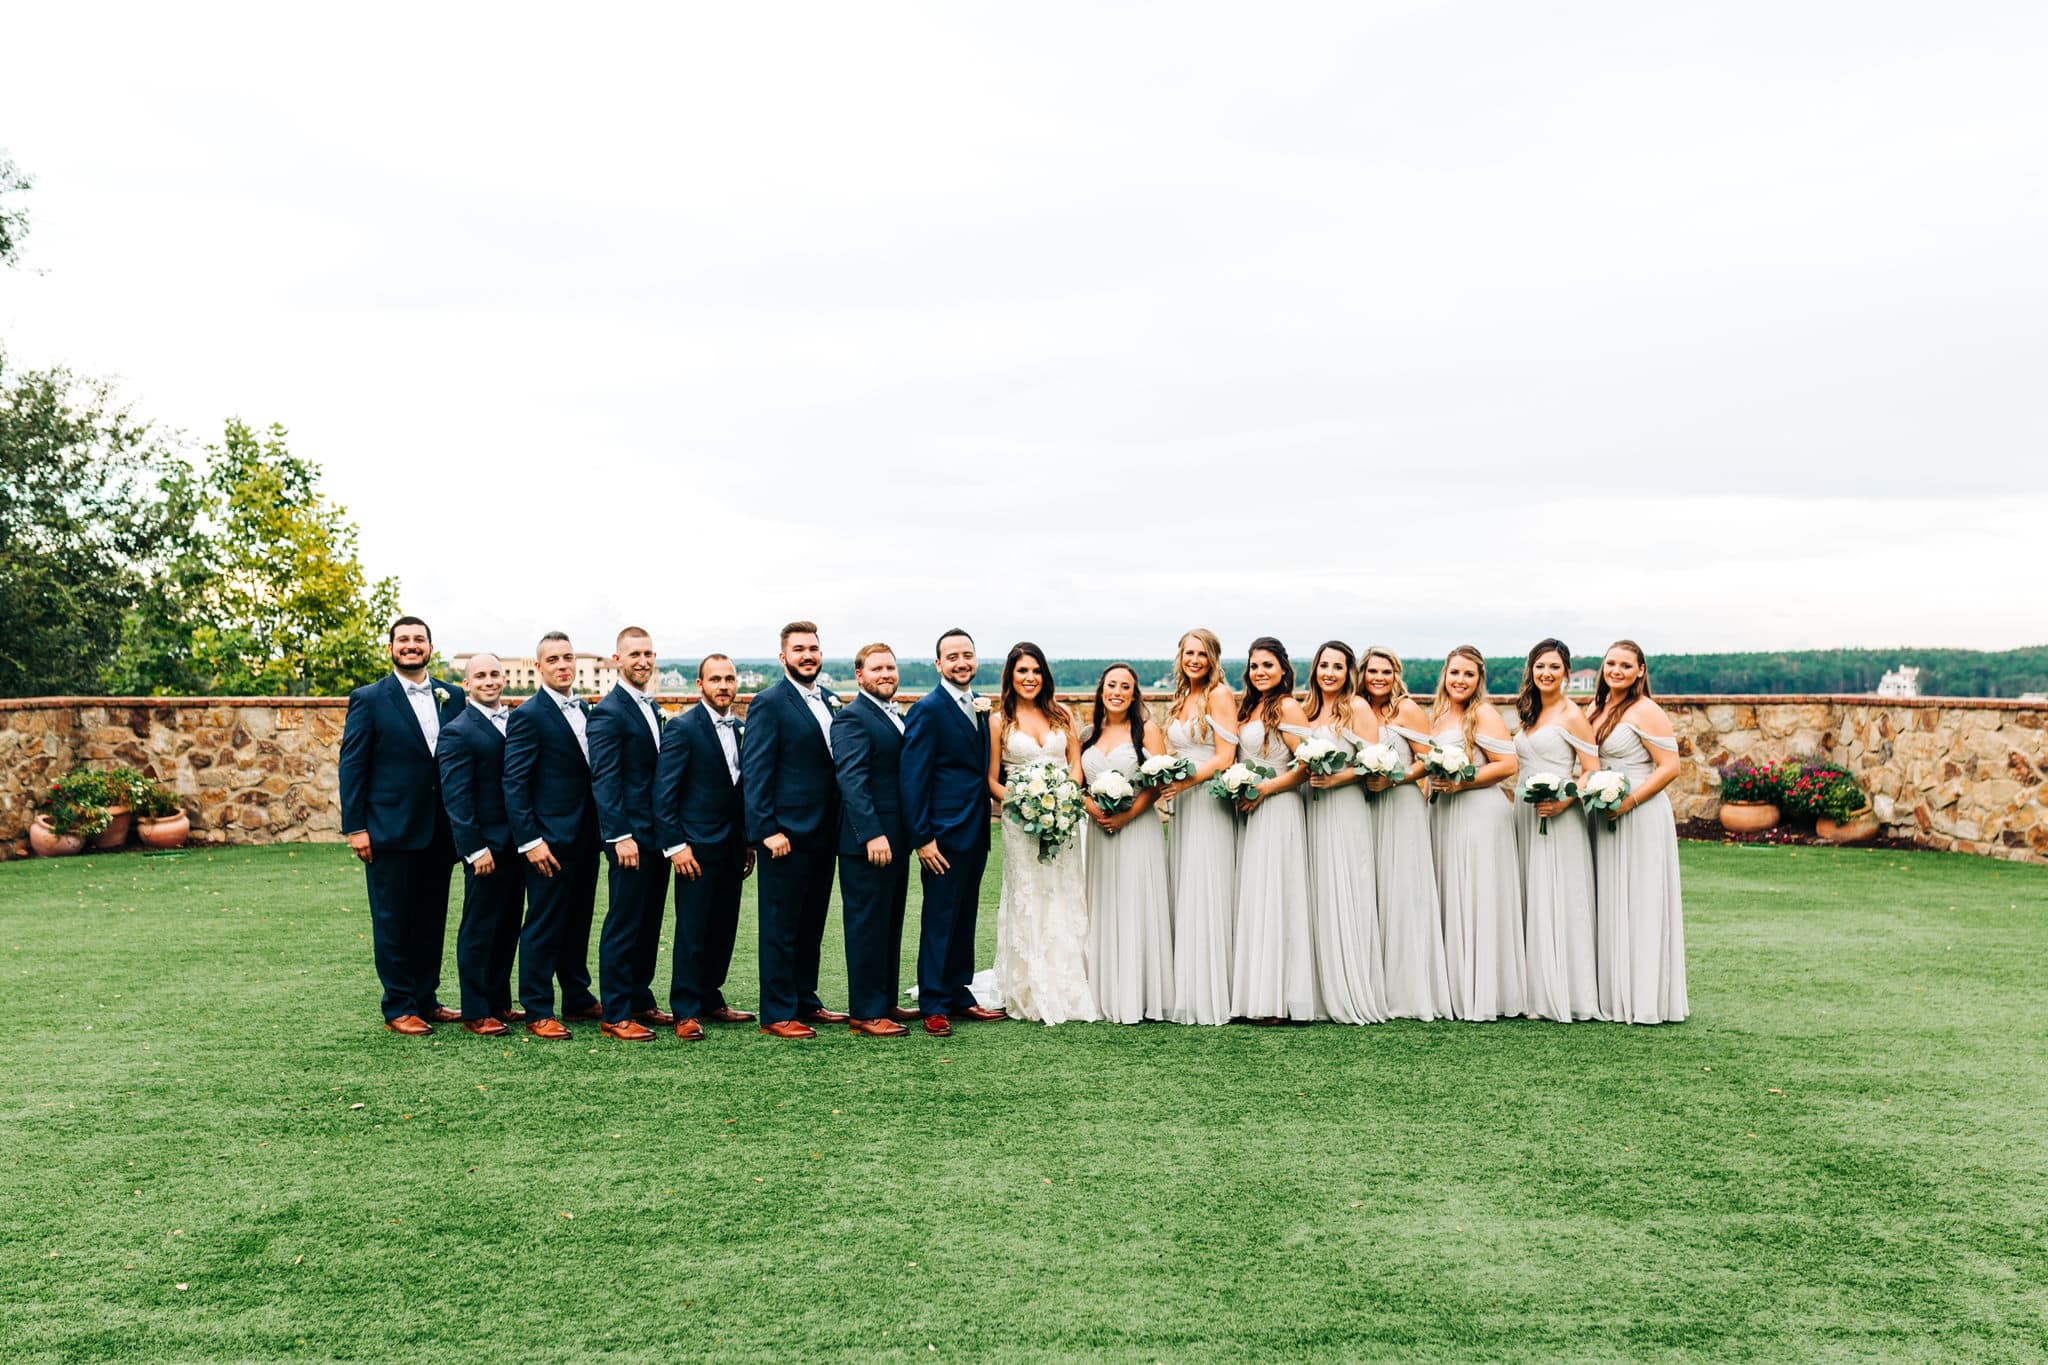 bridal party in grey dresses and groomsmen in black tuxes formal picture on front lawn of Bella Collina with bride and groom